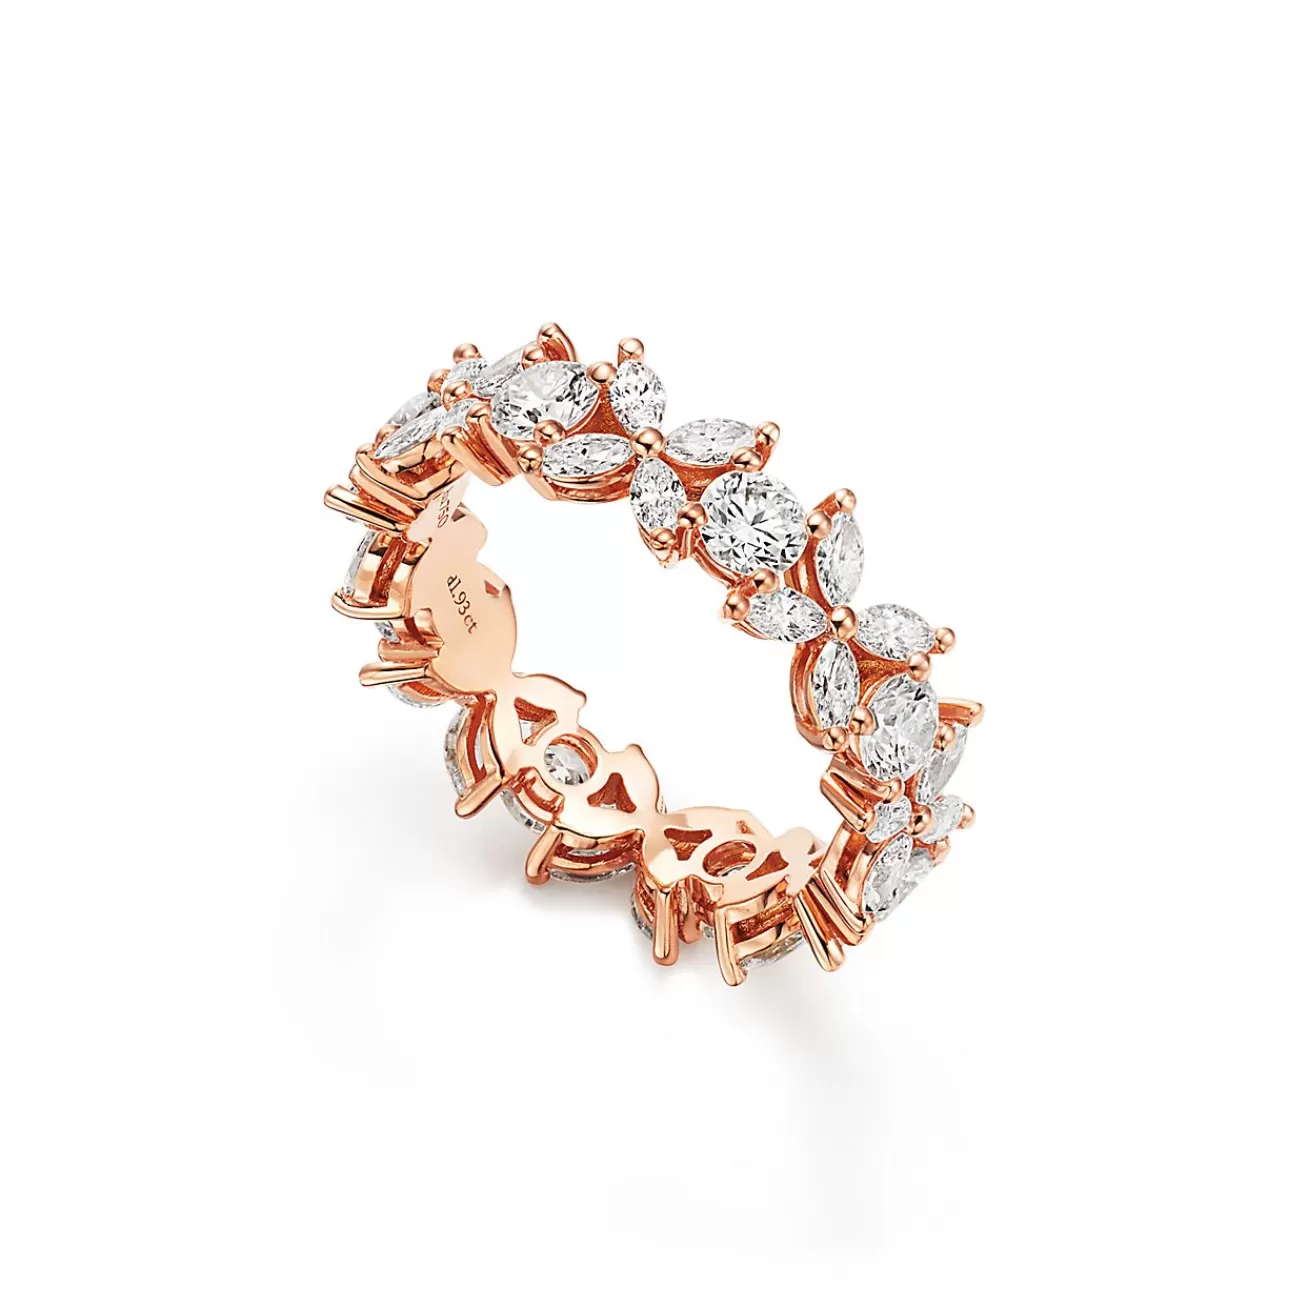 Tiffany & Co. Tiffany Victoria® alternating diamond band ring in 18k rose gold. | ^ Rings | Stacking Rings